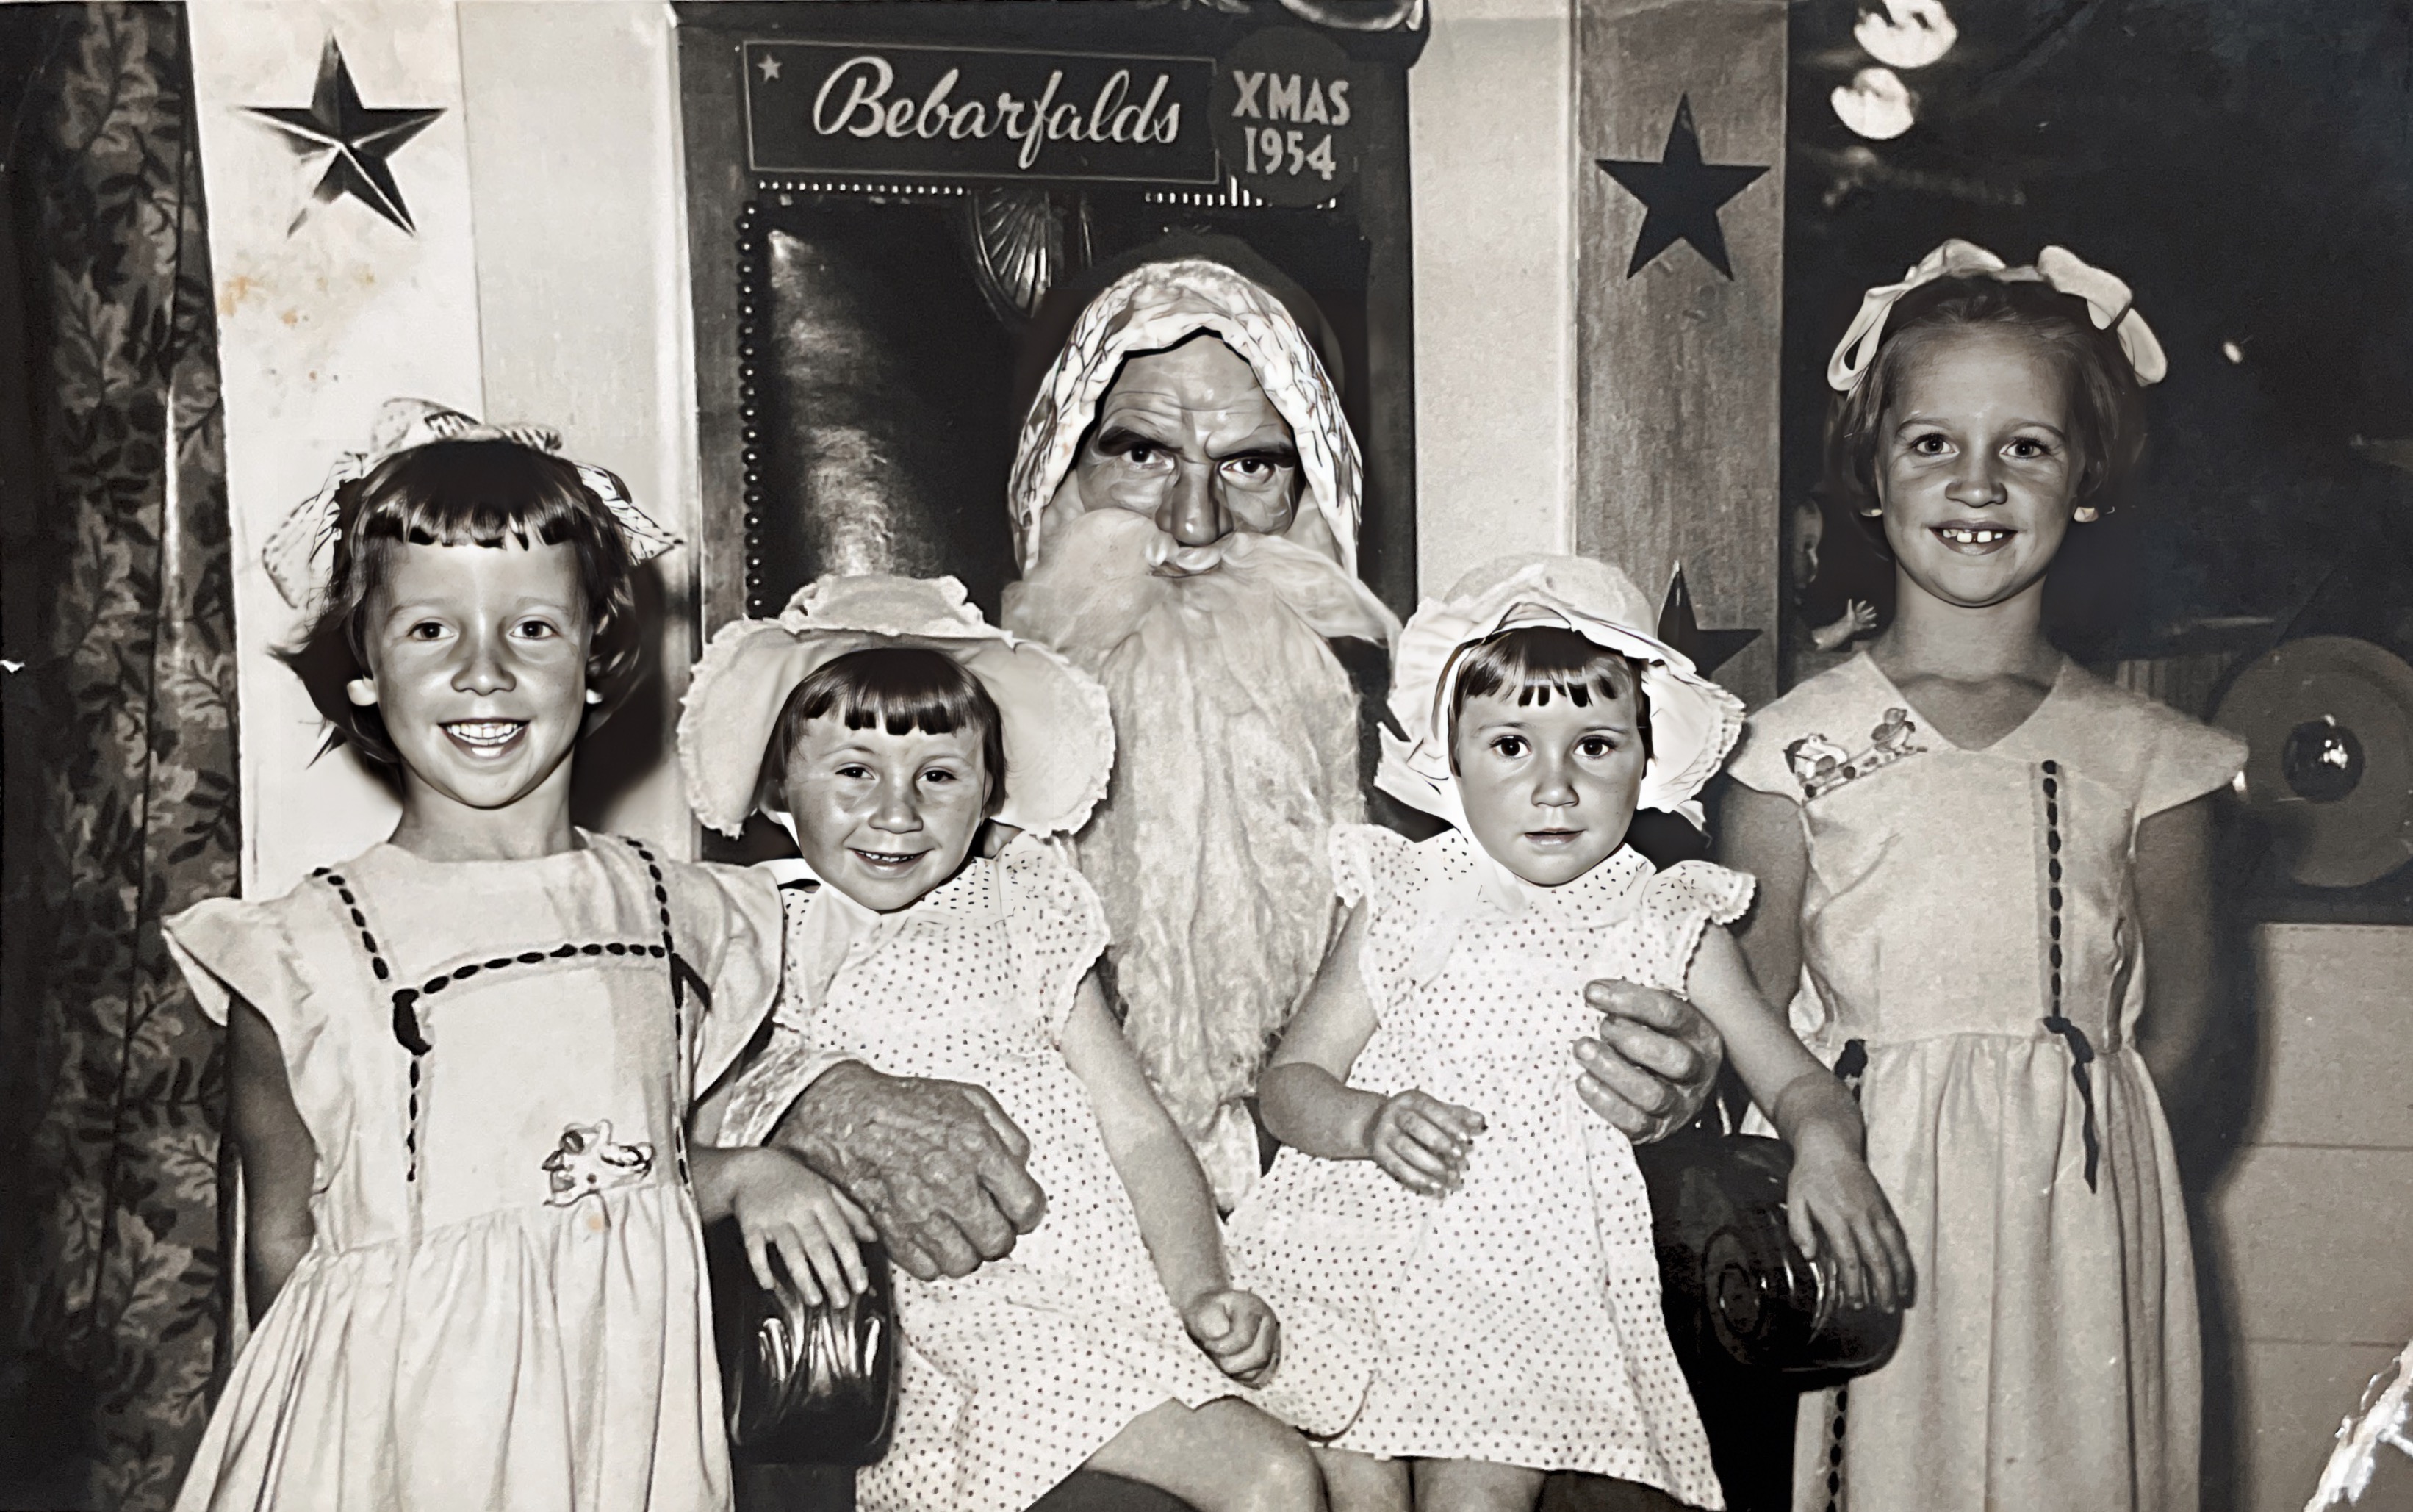 Claire and Maureen on Santa’s knee with friends Christmas 1954